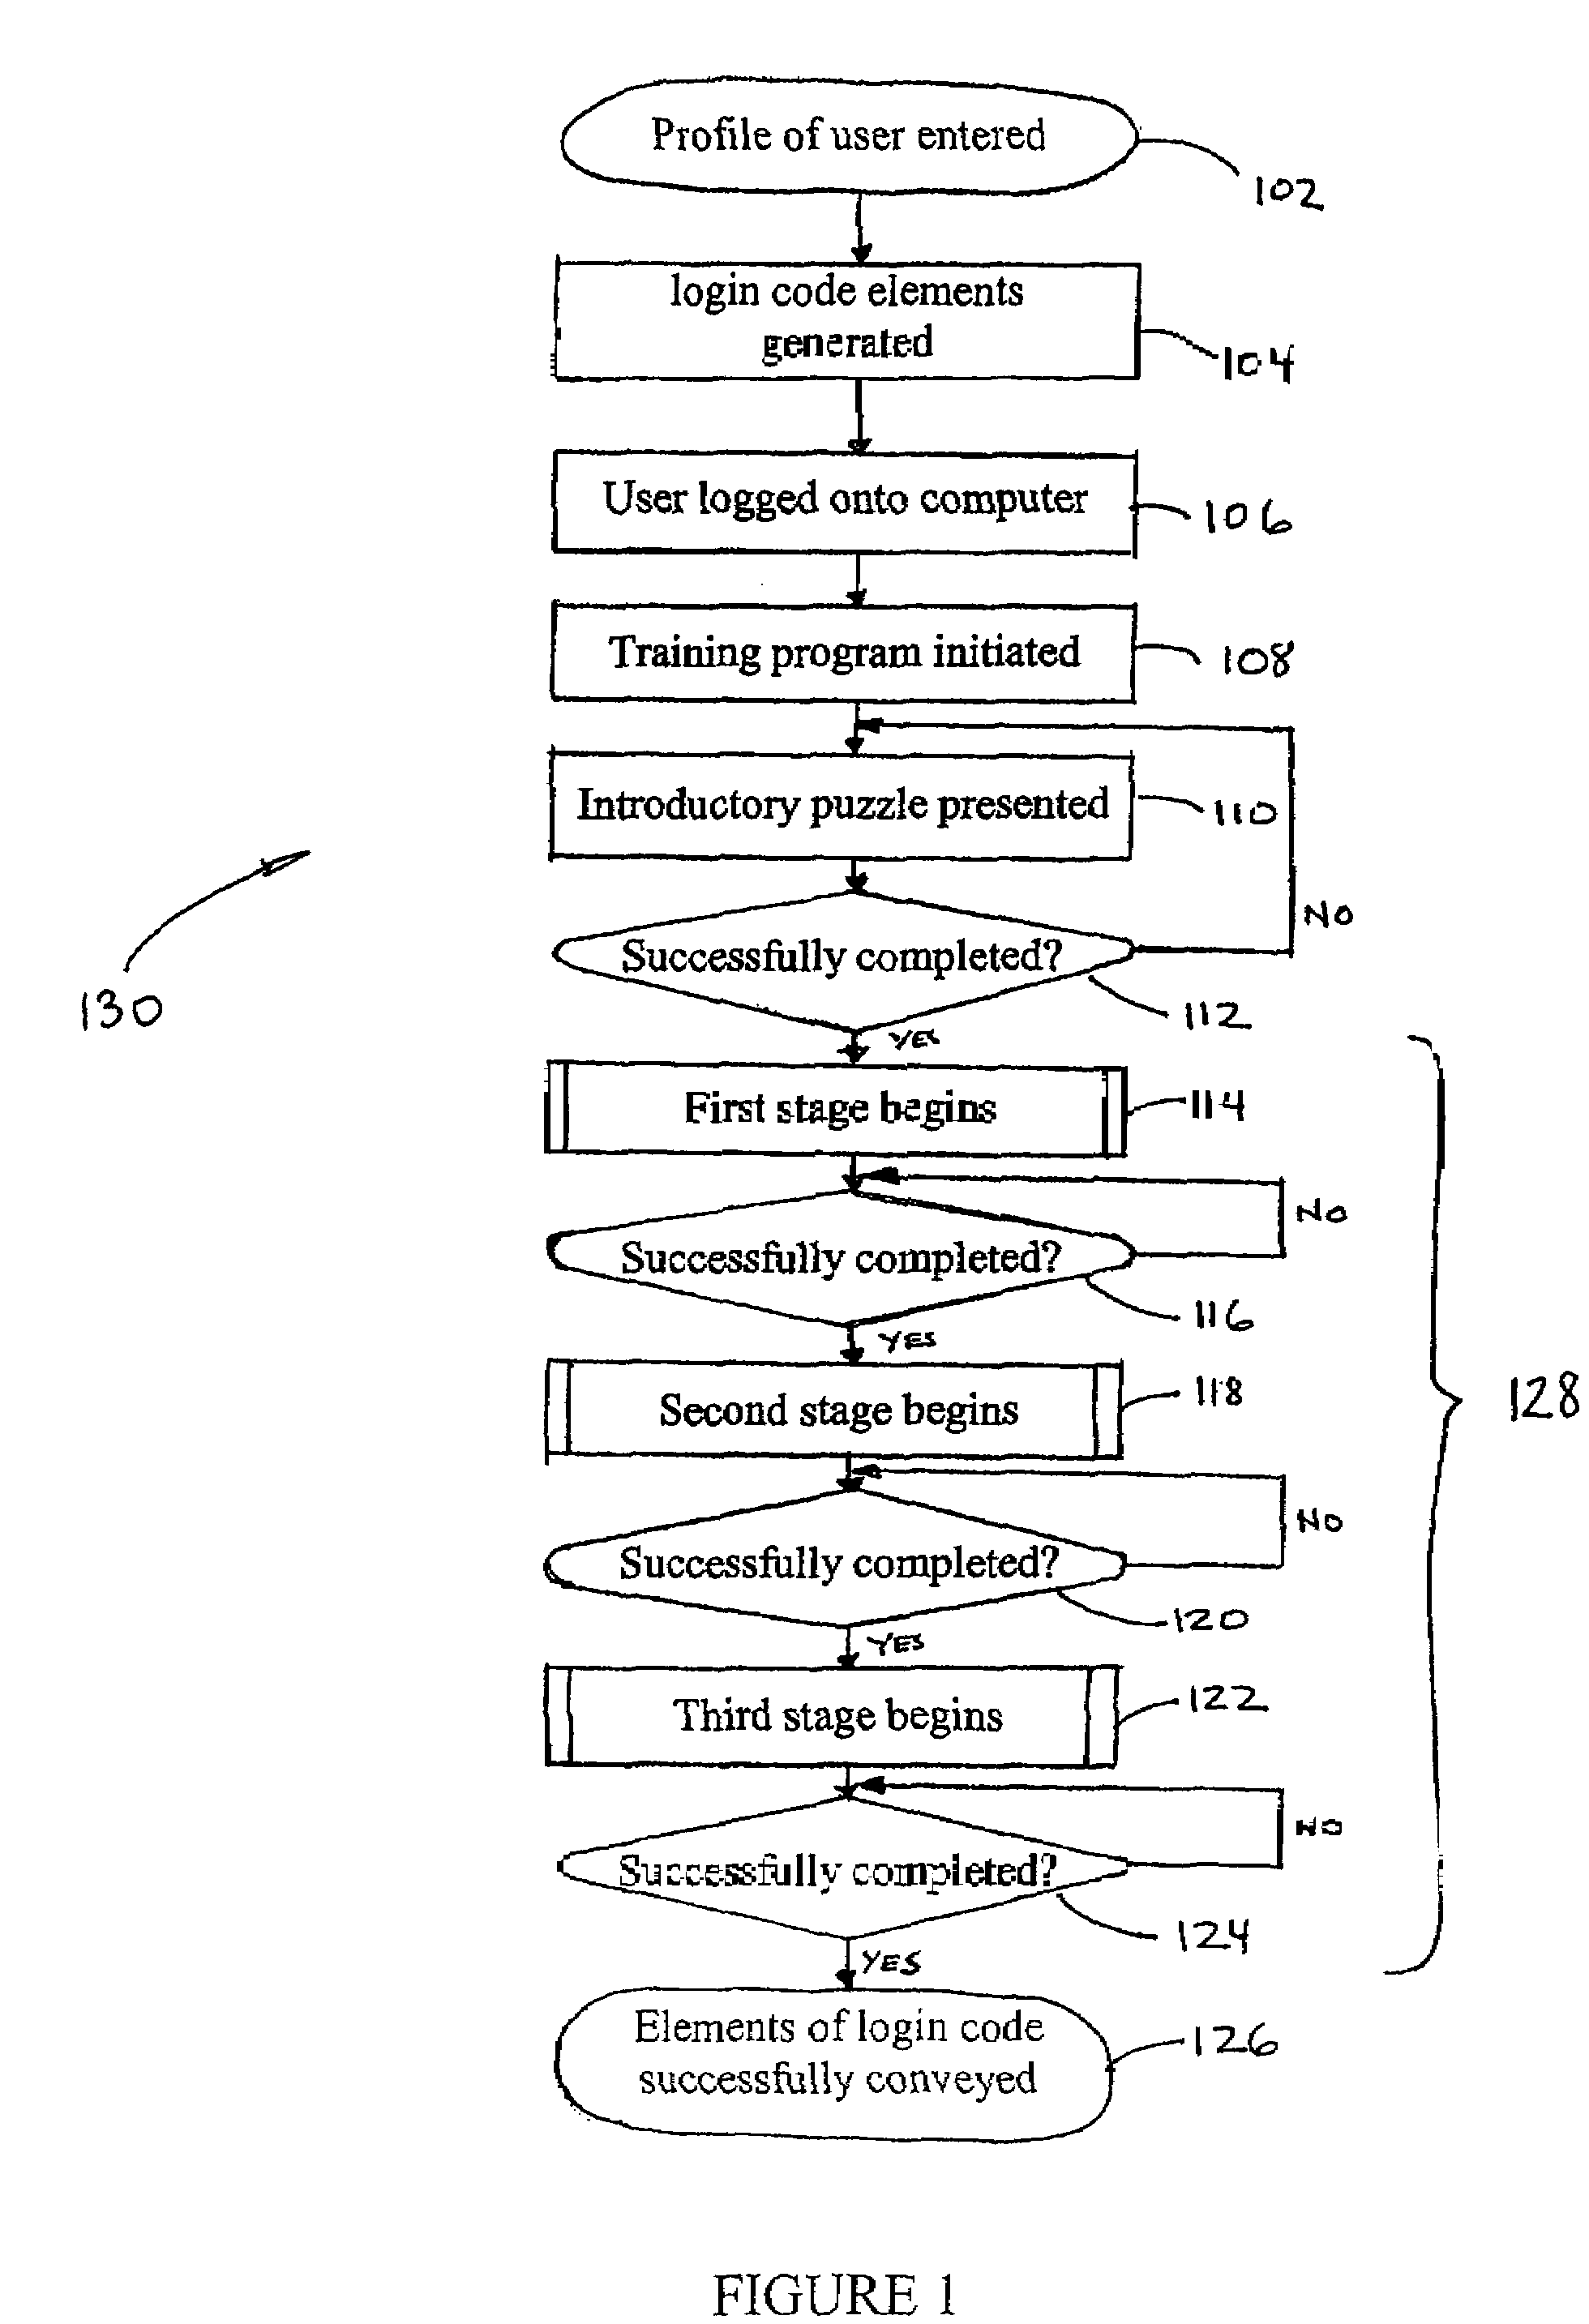 System and method for user login and tracking